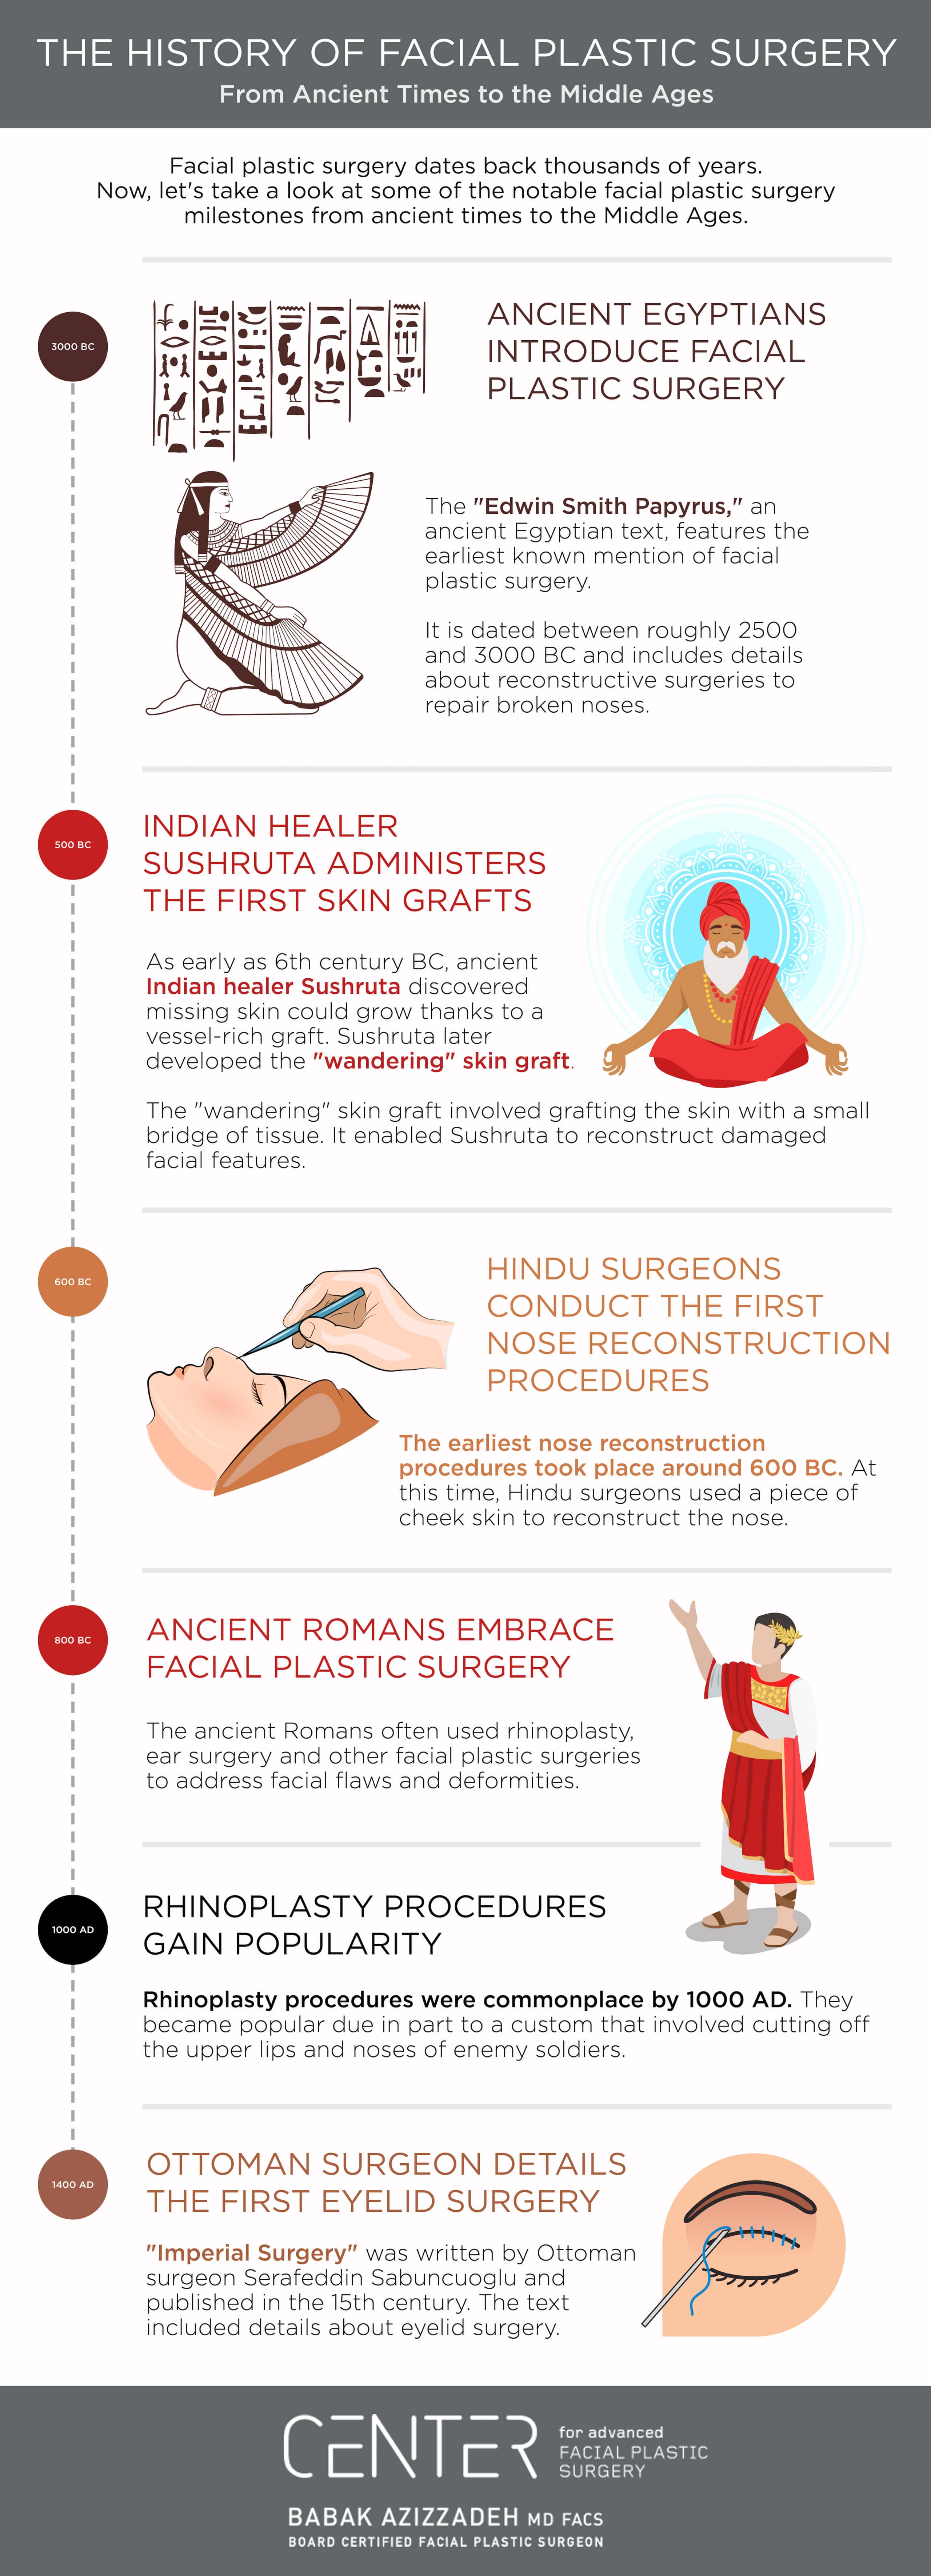 The History of Facial Plastic Surgery: From Ancient Times to the Middle Ages